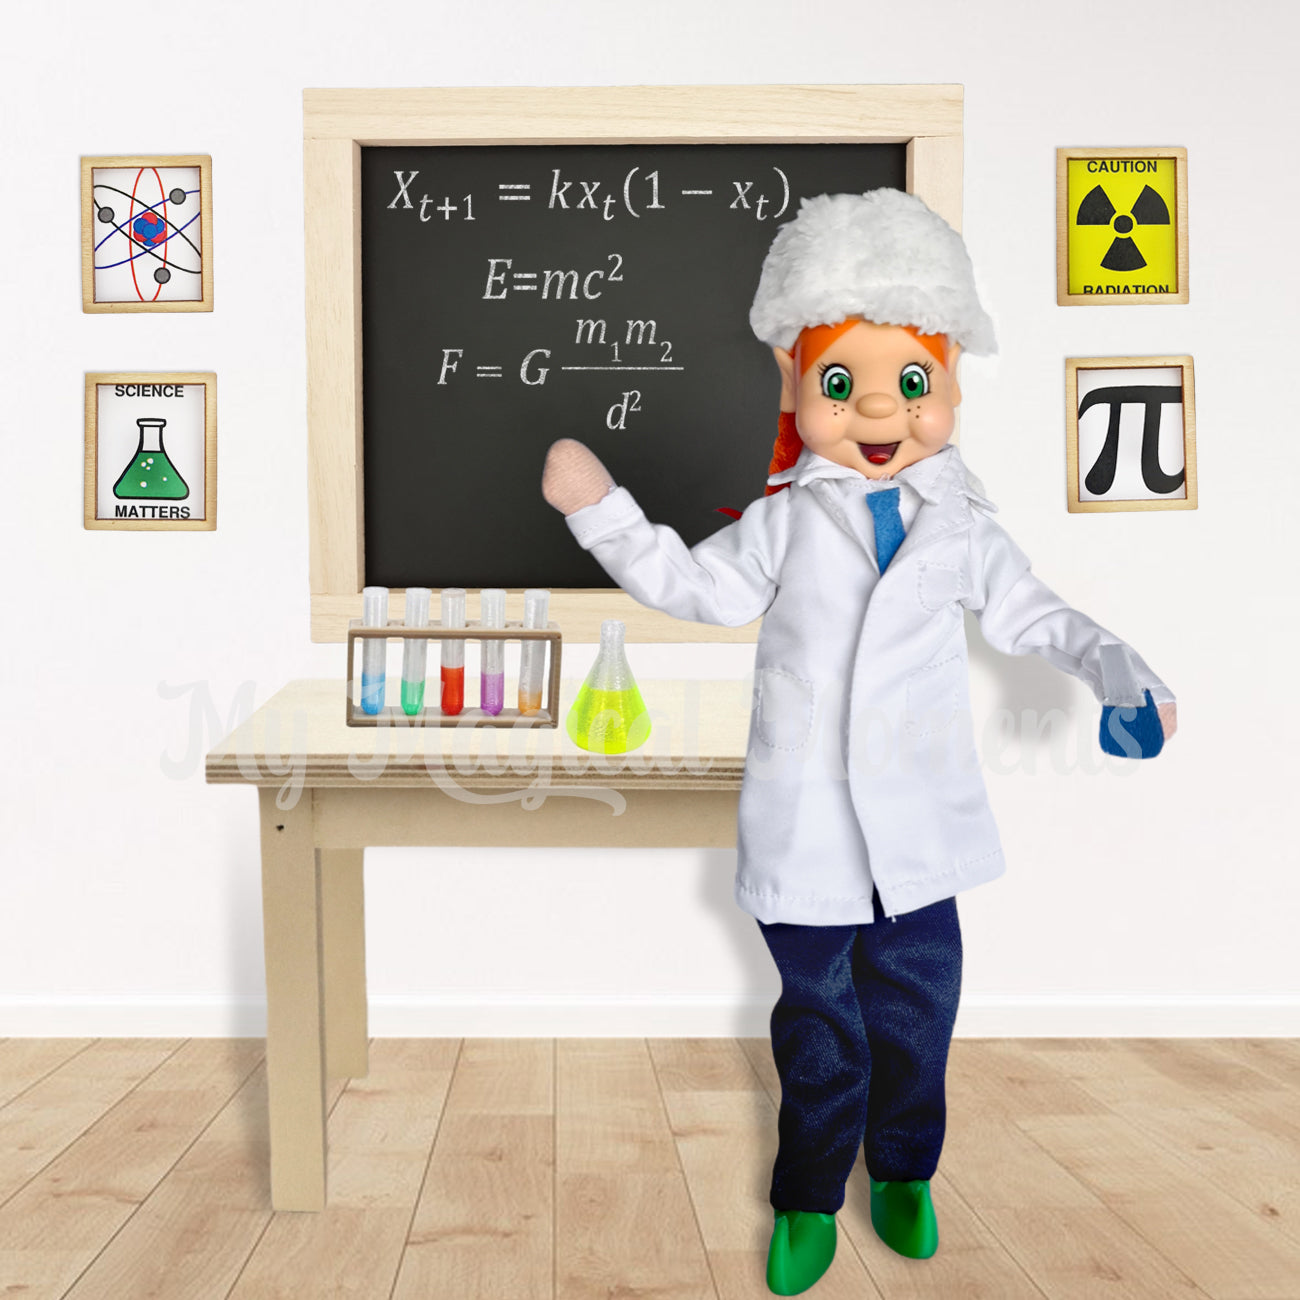 Orange hair elf dressed as a scientist, holding a beaker. Table behind with a miniature chemistry set and chalkboard with science equations